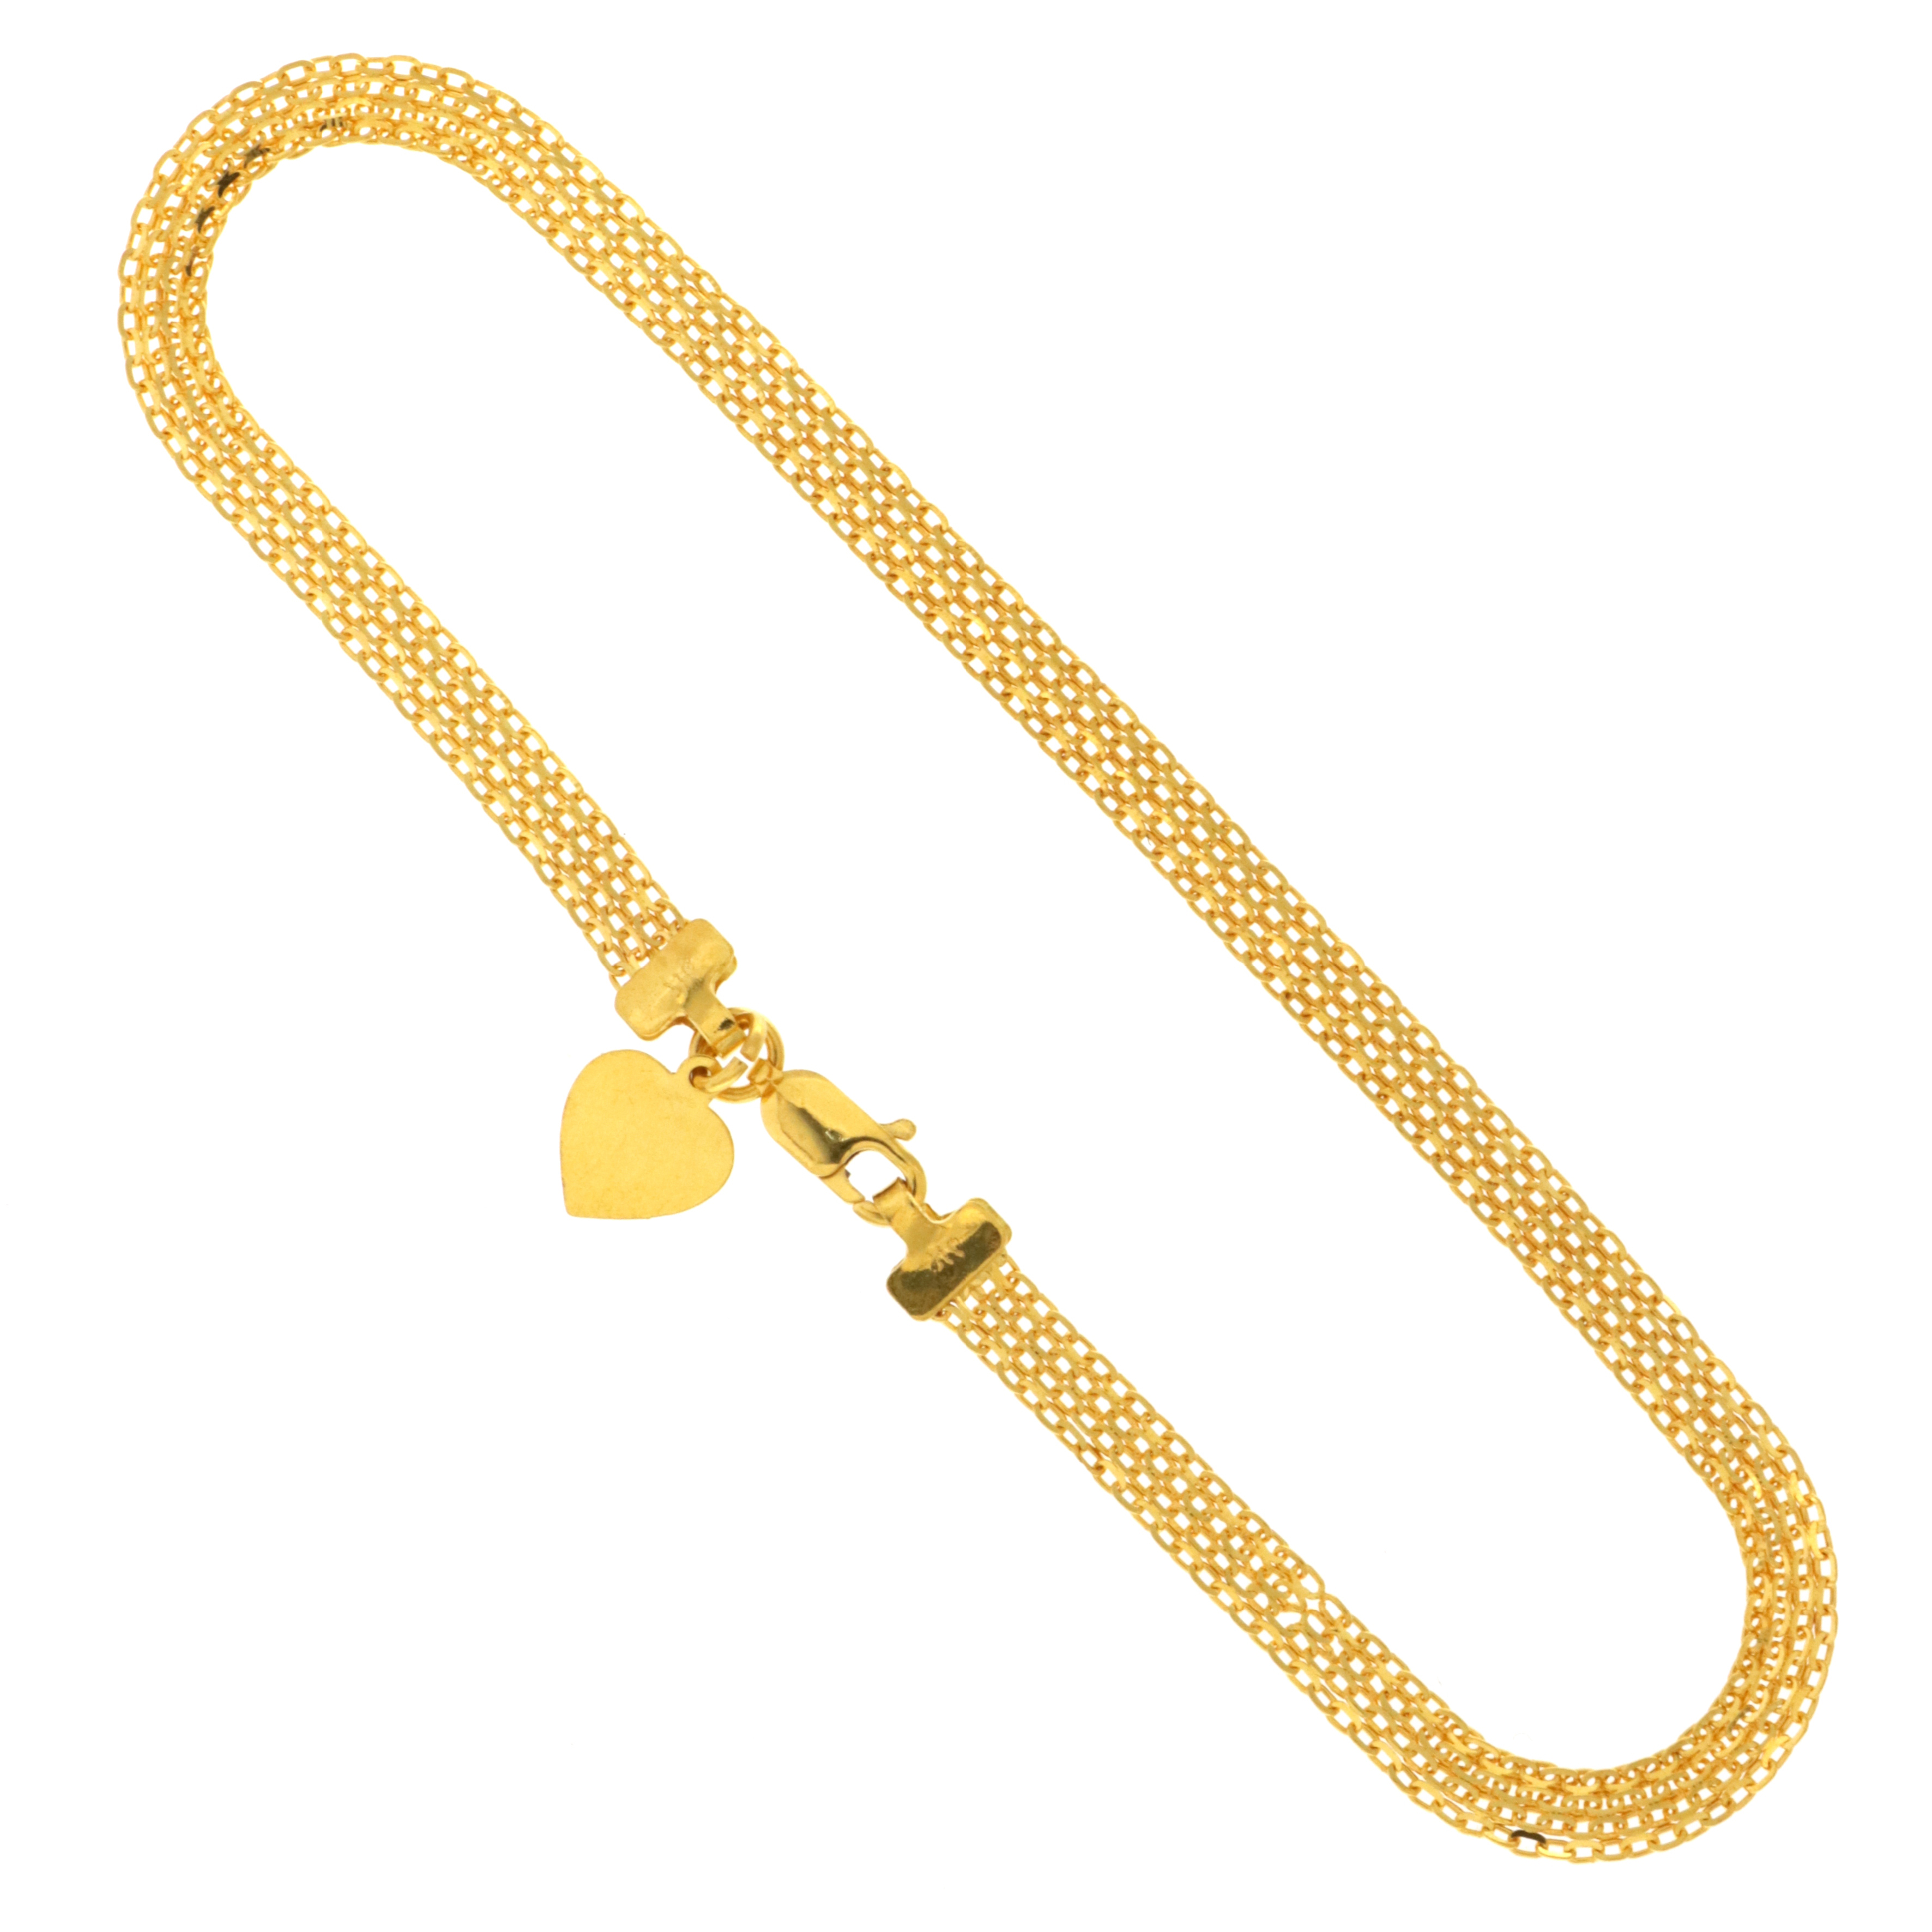 22carat Gold Heart Charm Anklet (Single)